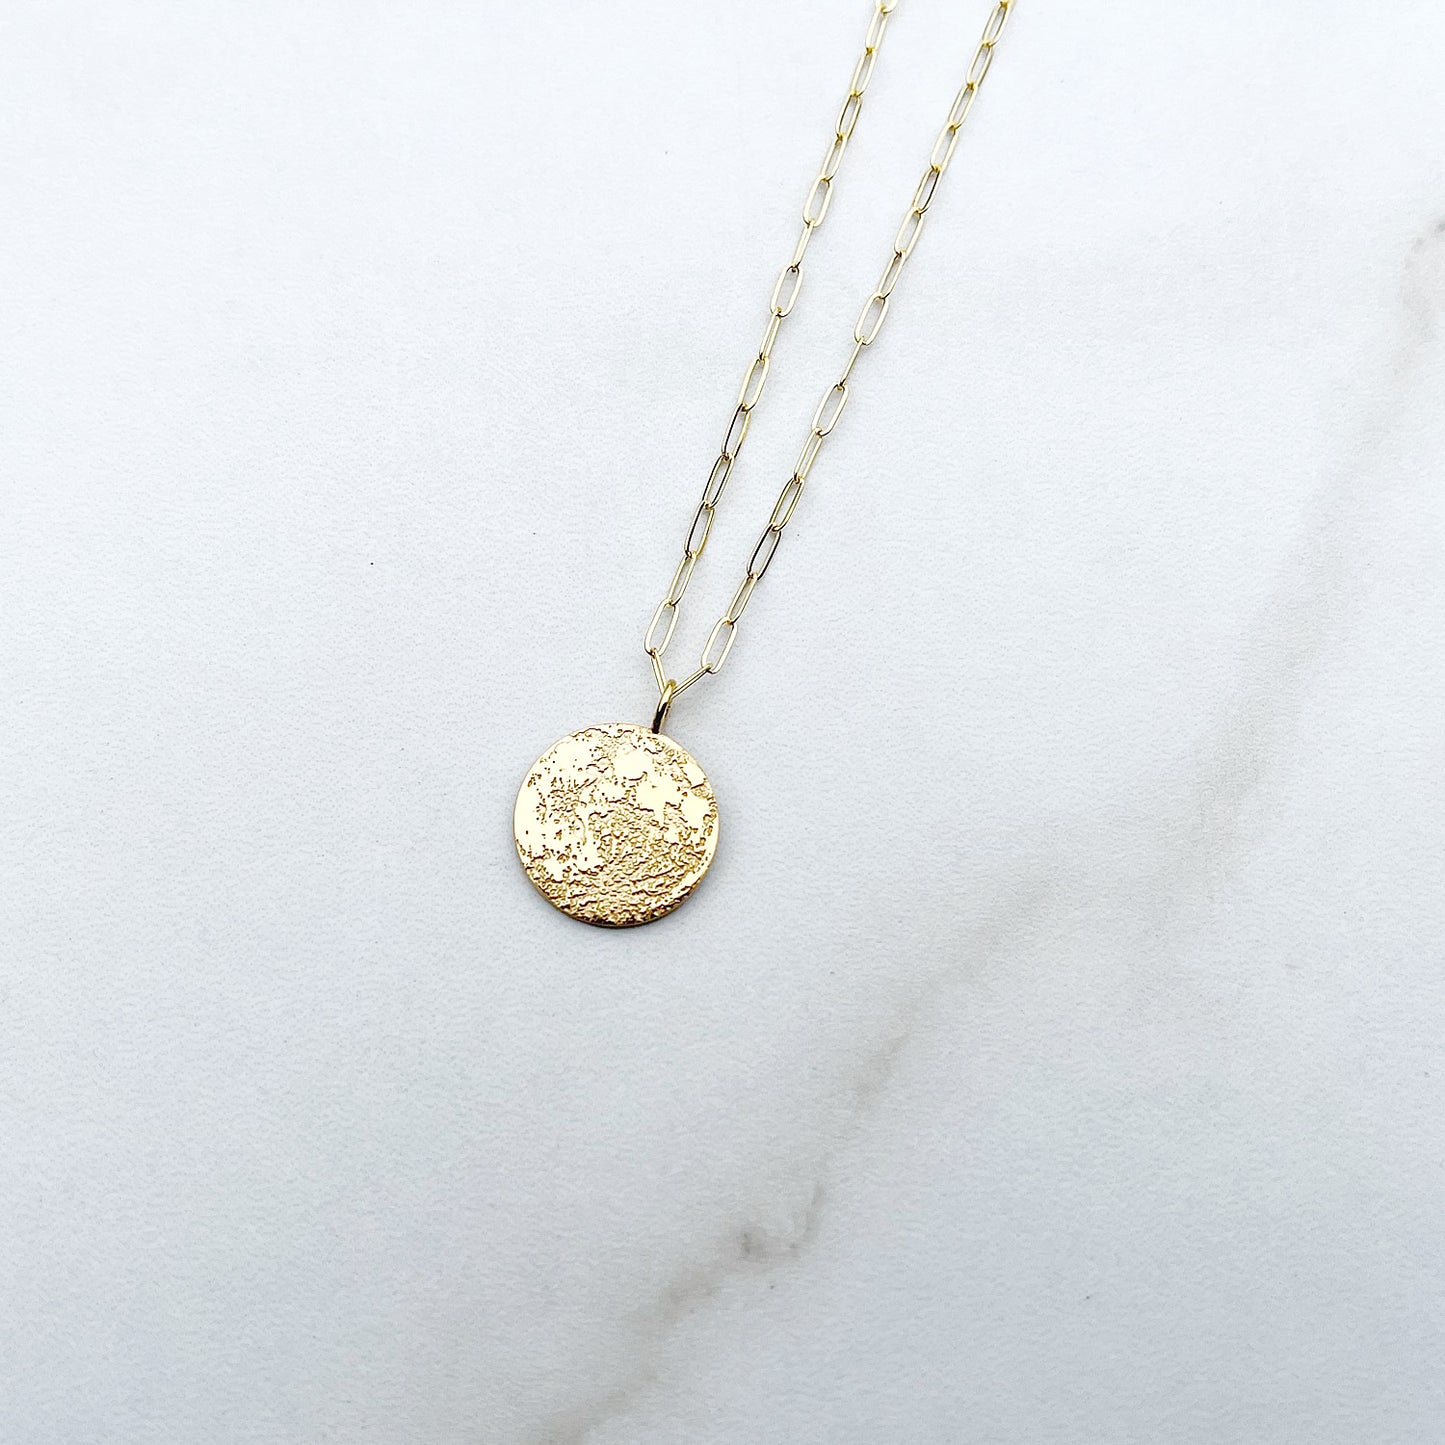 full moon necklace in sterling silver or gold vermeil | silver moon pendant | gold moon pendant | gift for her